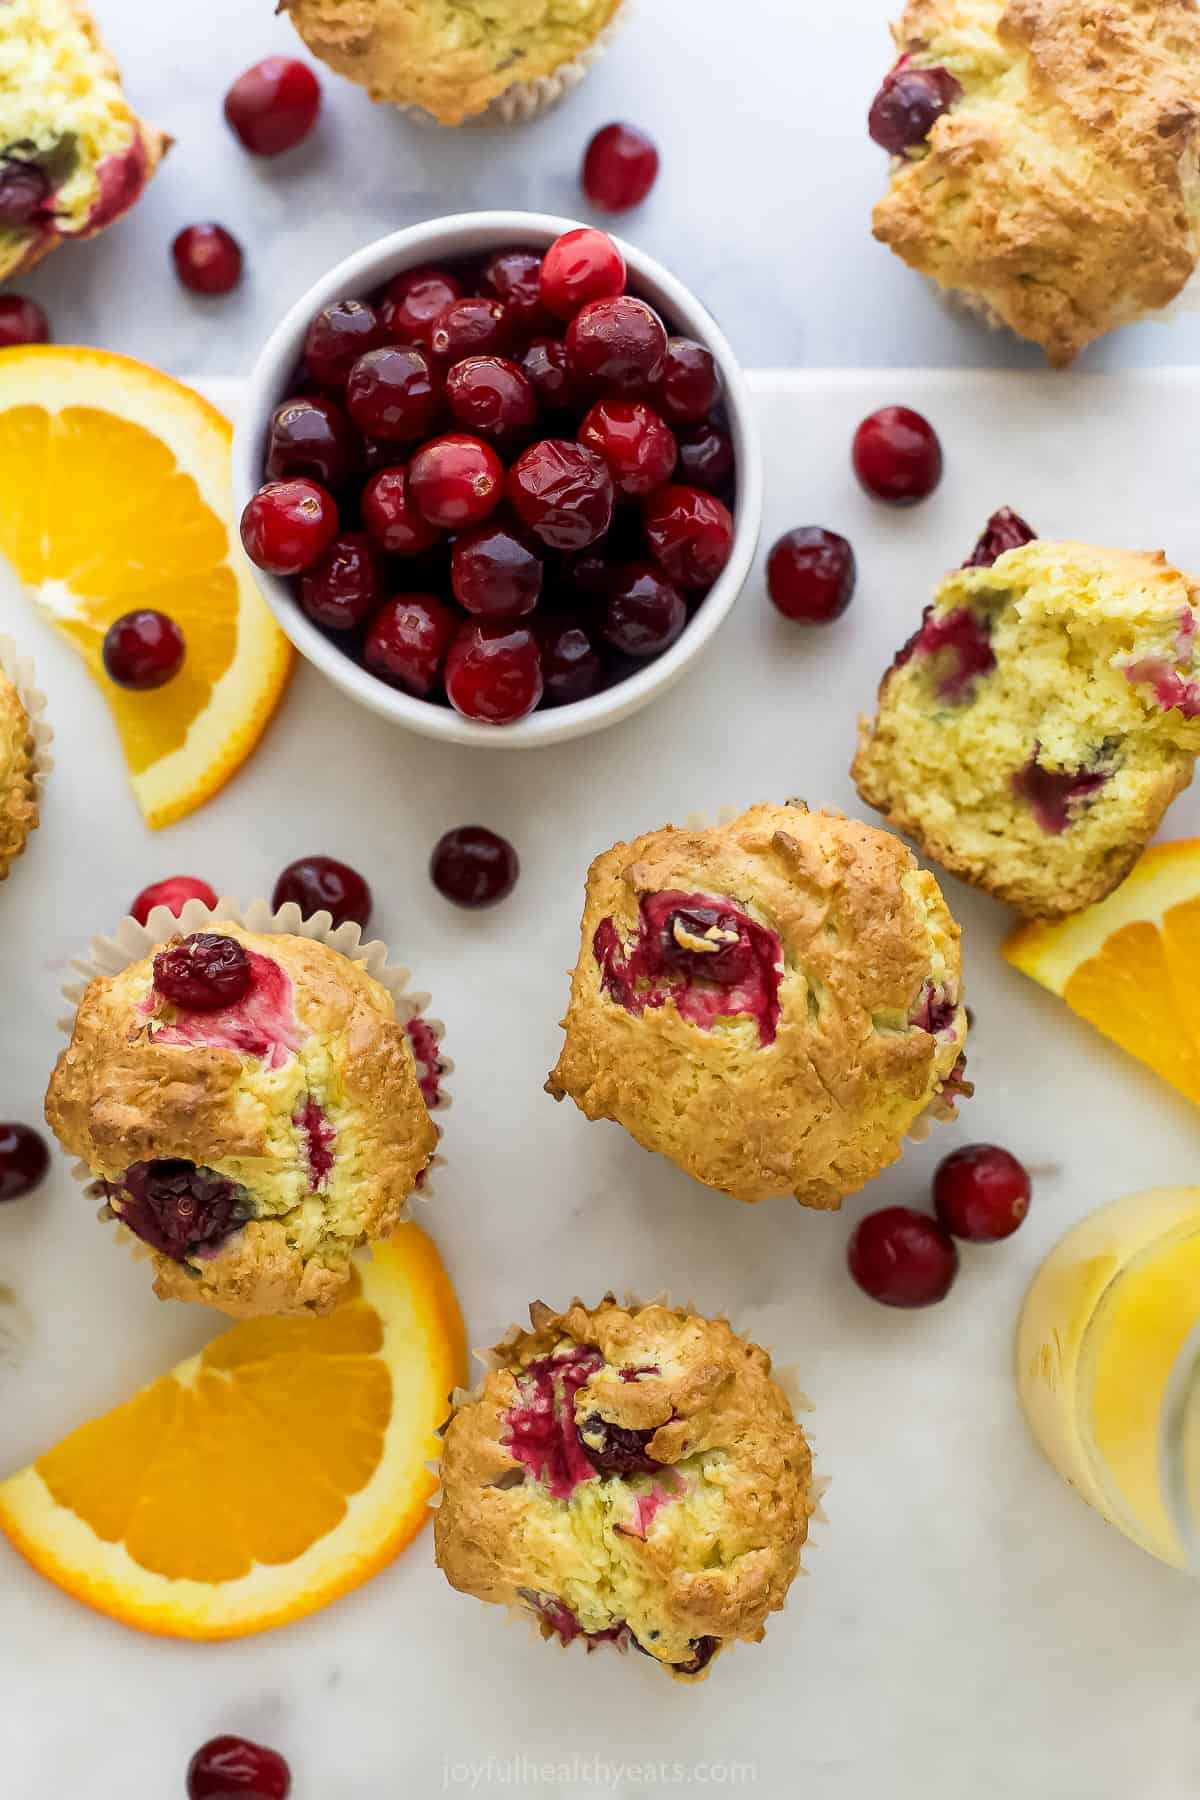 Gluten-free muffins on a countertop full of fresh fruit with one cut in half to reveal the fluffy interior